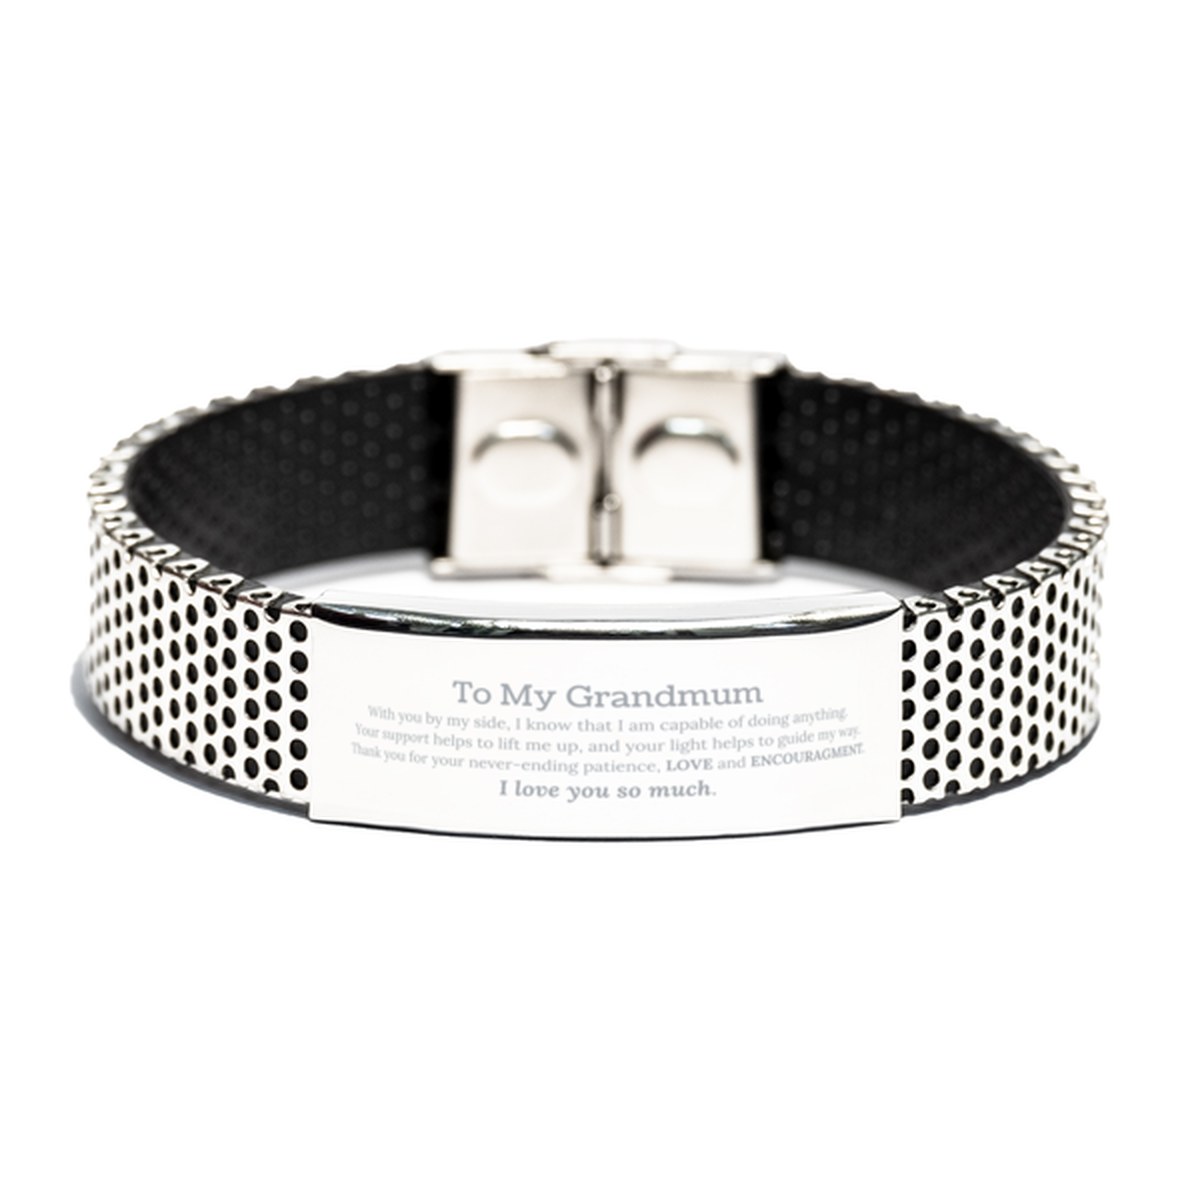 Appreciation Grandmum Stainless Steel Bracelet Gifts, To My Grandmum Birthday Christmas Wedding Keepsake Gifts for Grandmum With you by my side, I know that I am capable of doing anything. I love you so much